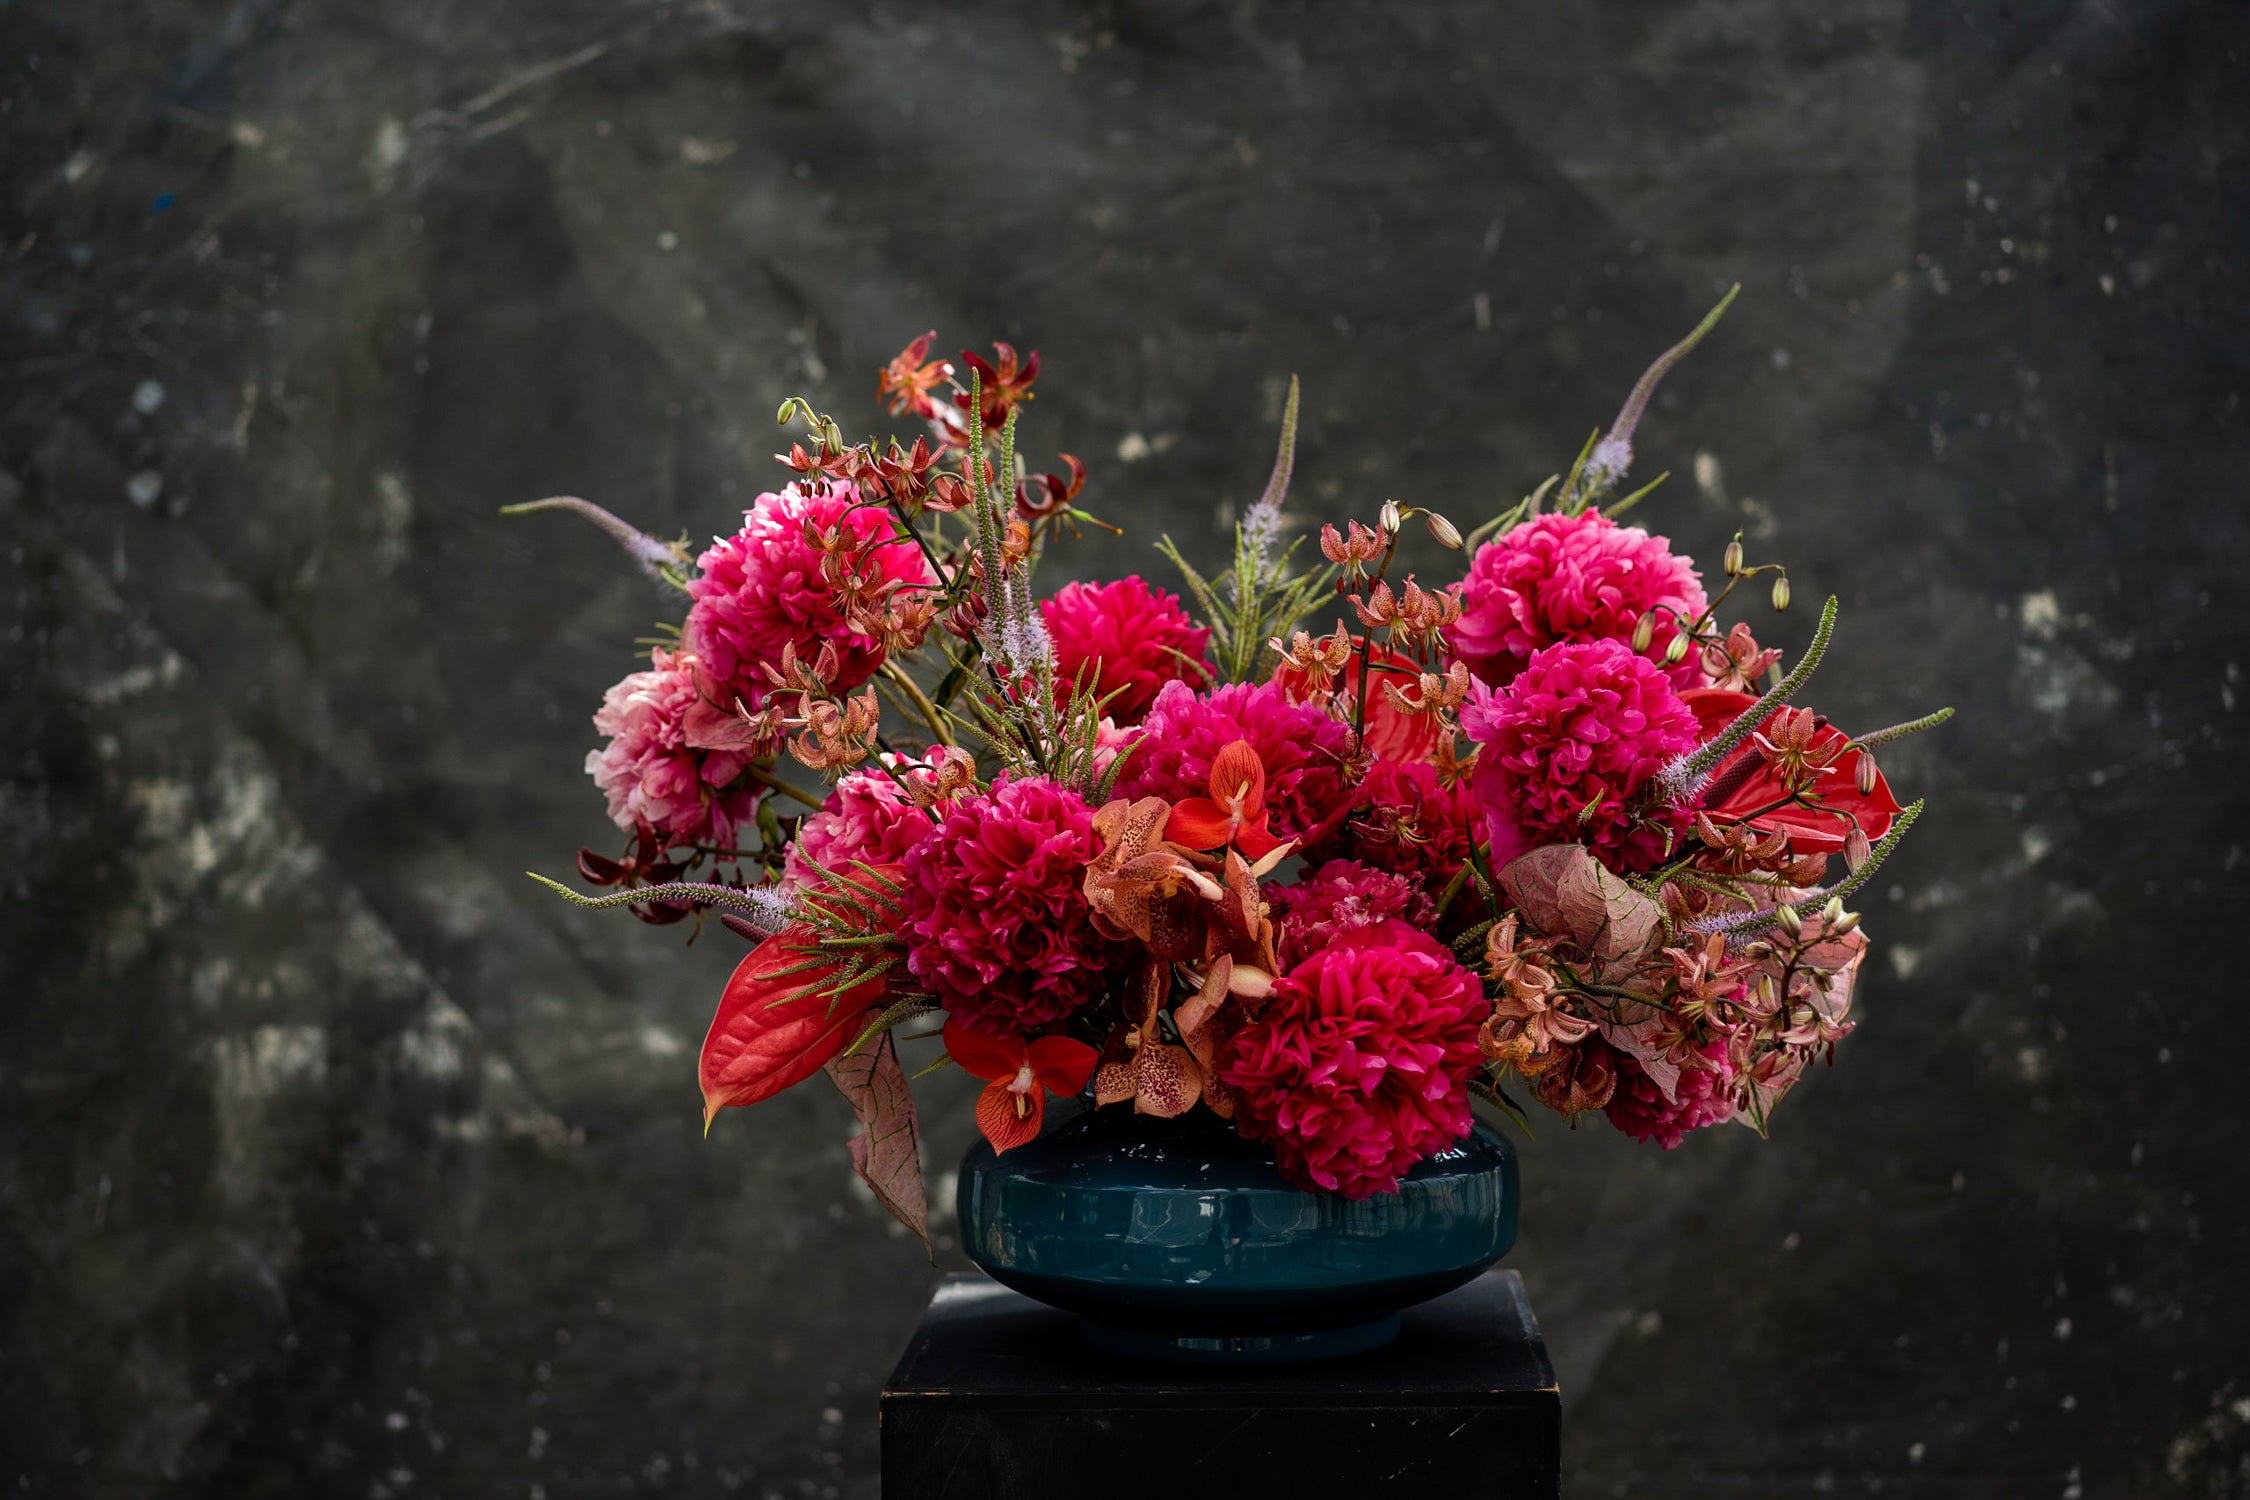 An ode to the beloved Peony